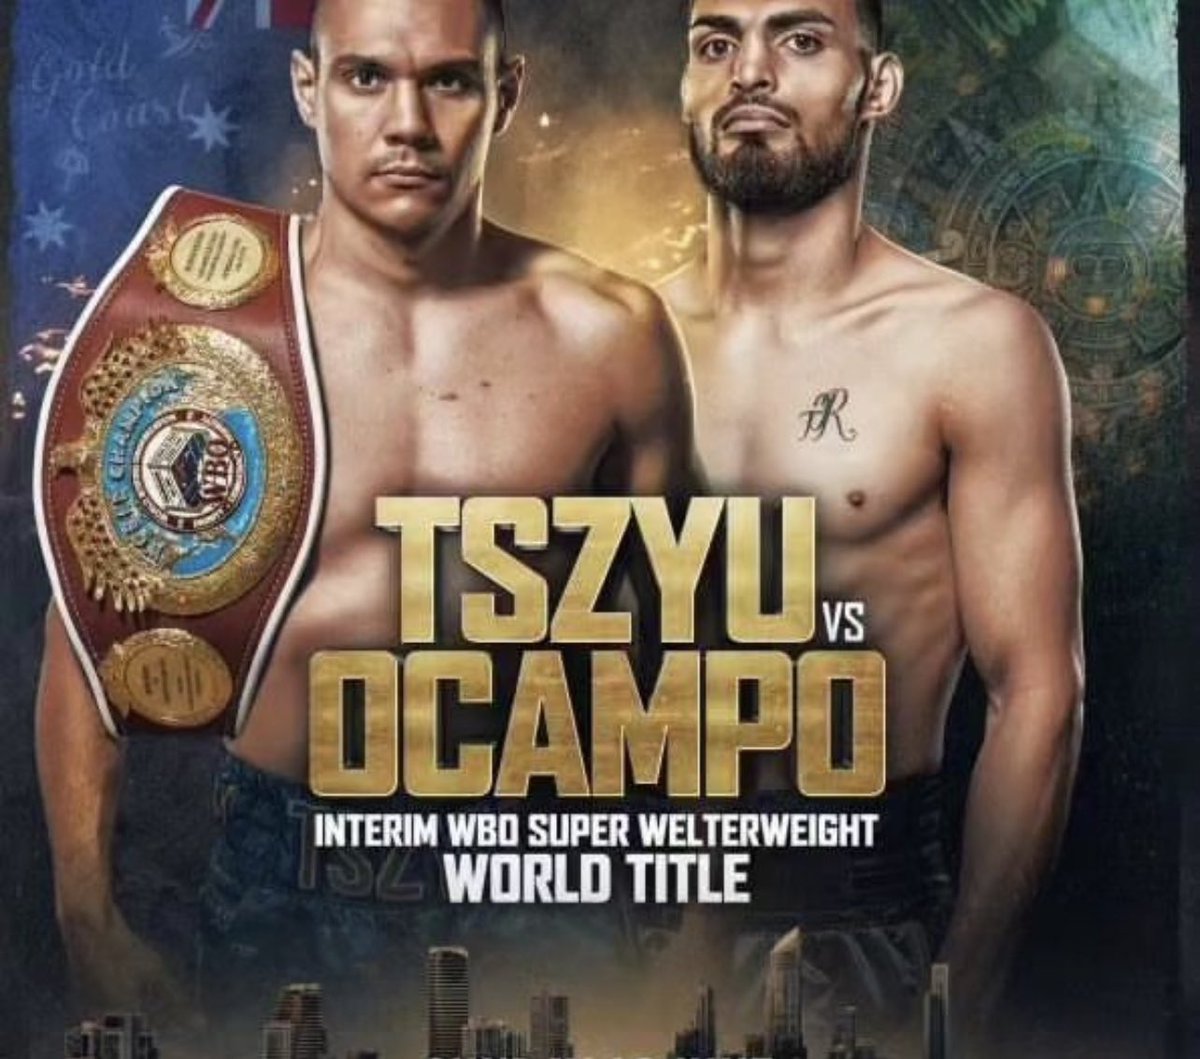 Tonight on Showtime at 11:30pm ET WBO Interim Super Welterweight Champion Tim Tszyu 22-0-16 KO’s vs 154 lbs Contender Mexico’s Carlos Ocampo 35-2-23 KO’s #tszyuocampo #showtimeboxing #pbcboxing #fighthooknews  #boxingmedia #boxingfans #boxingworld #boxingfanatik #boxingnews